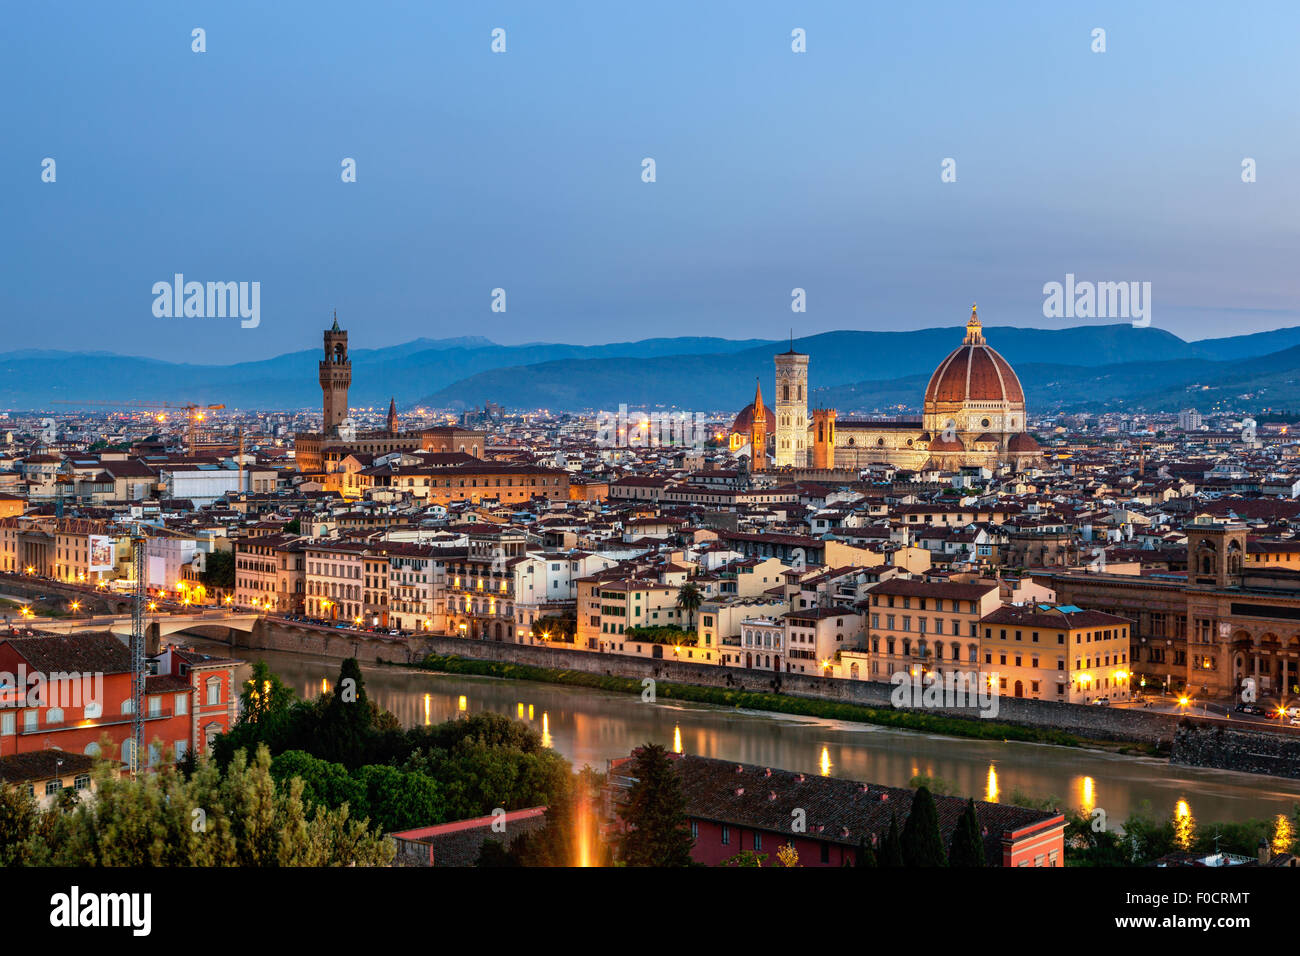 Skyline of Florence the capital of Tuscany , Northern Italy. Amazing city center of Renaissance art and architecture. Stock Photo